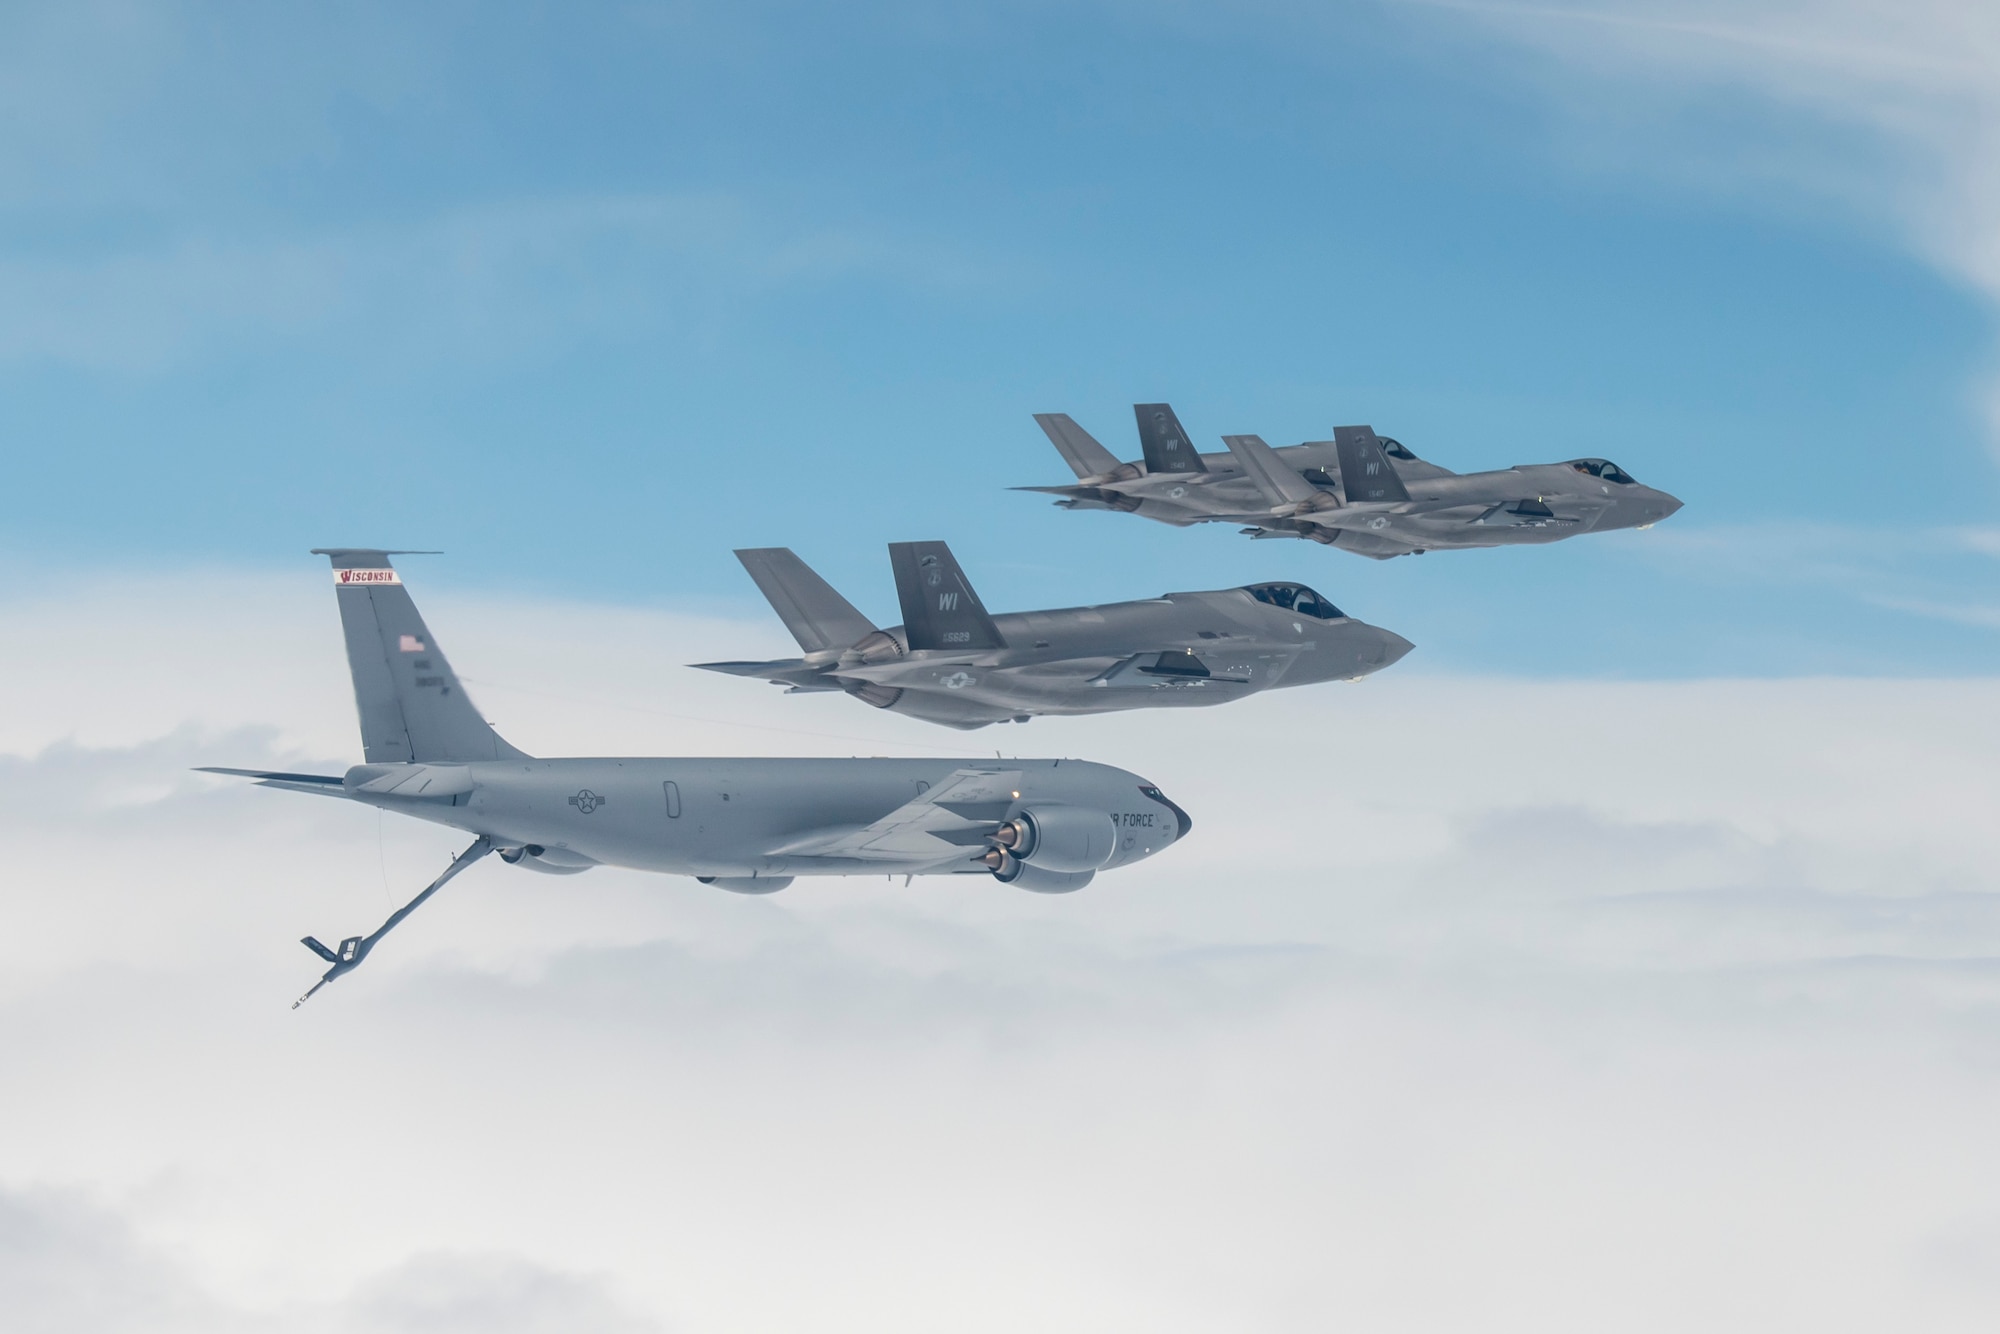 F-35 Lightning II aircraft assigned to the 115th Fighter Wing, Truax Field, Madison, Wisconsin receive fuel from a KC-135 Stratotanker assigned to the 128th Air Refueling Wing in Milwaukee during their initial flight to Truax Field April 25, 2023.